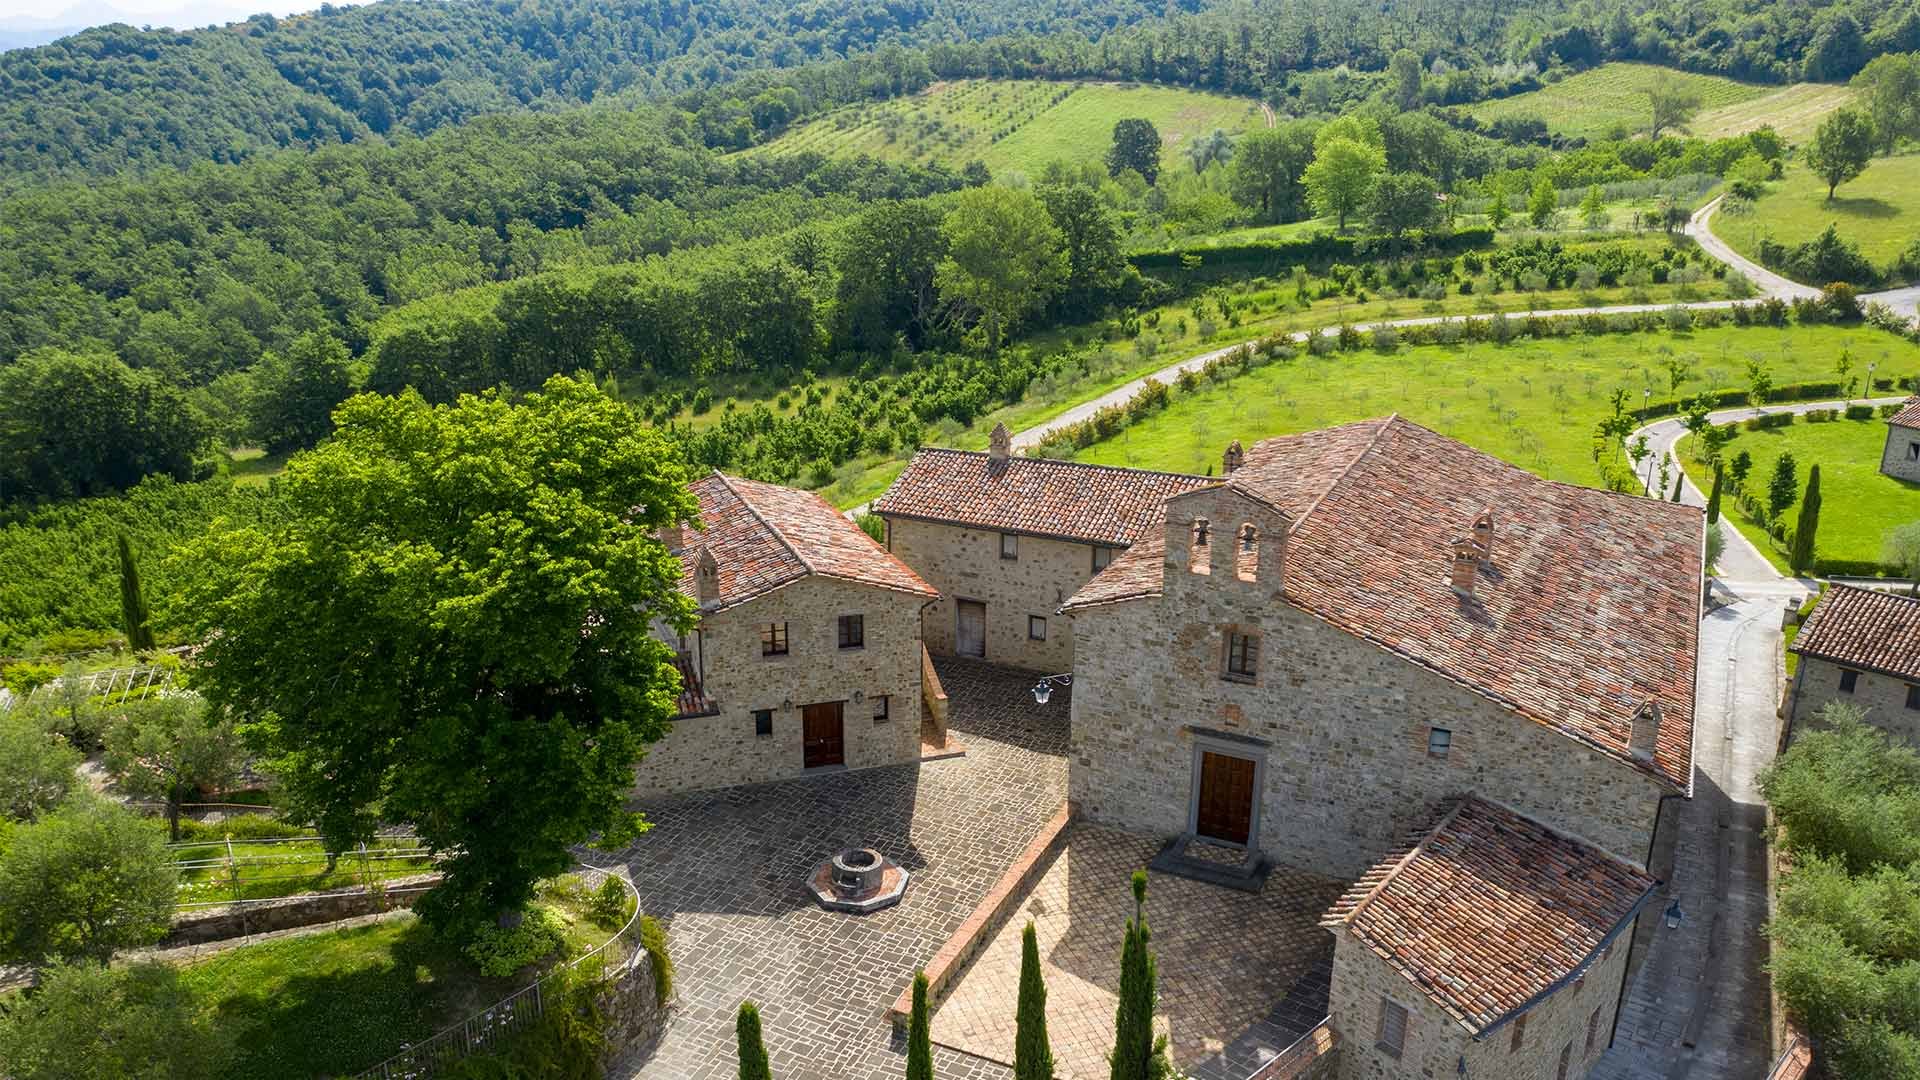 Francis York Ancient Hamlet For Sale Near the Border of Tuscany and Umbria 26.jpg